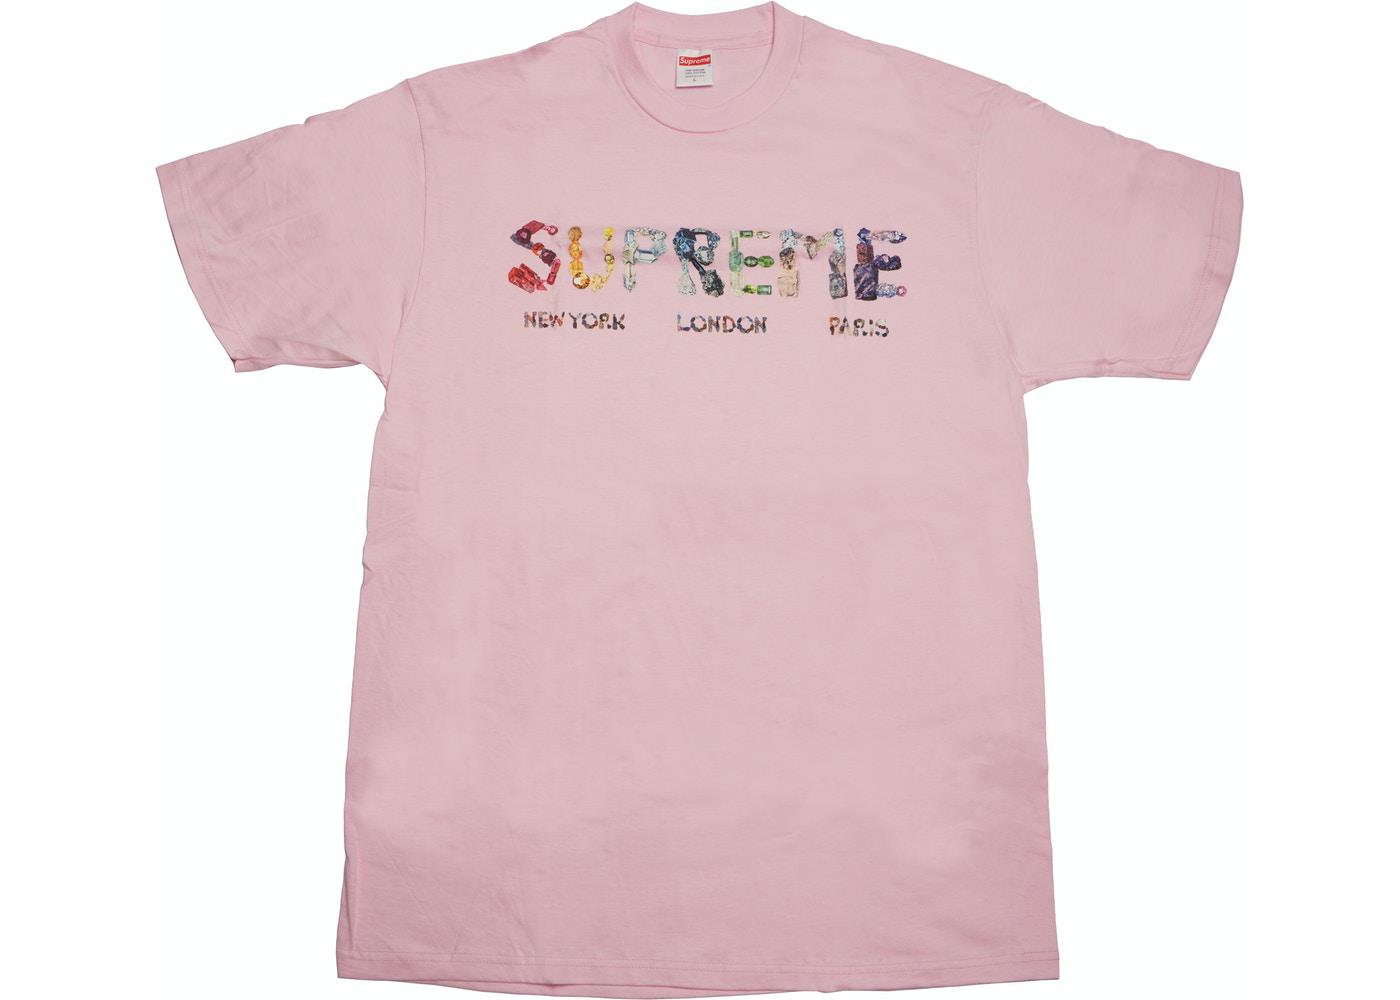 Braces Tee Light Pink by SUPREME | jellibeans